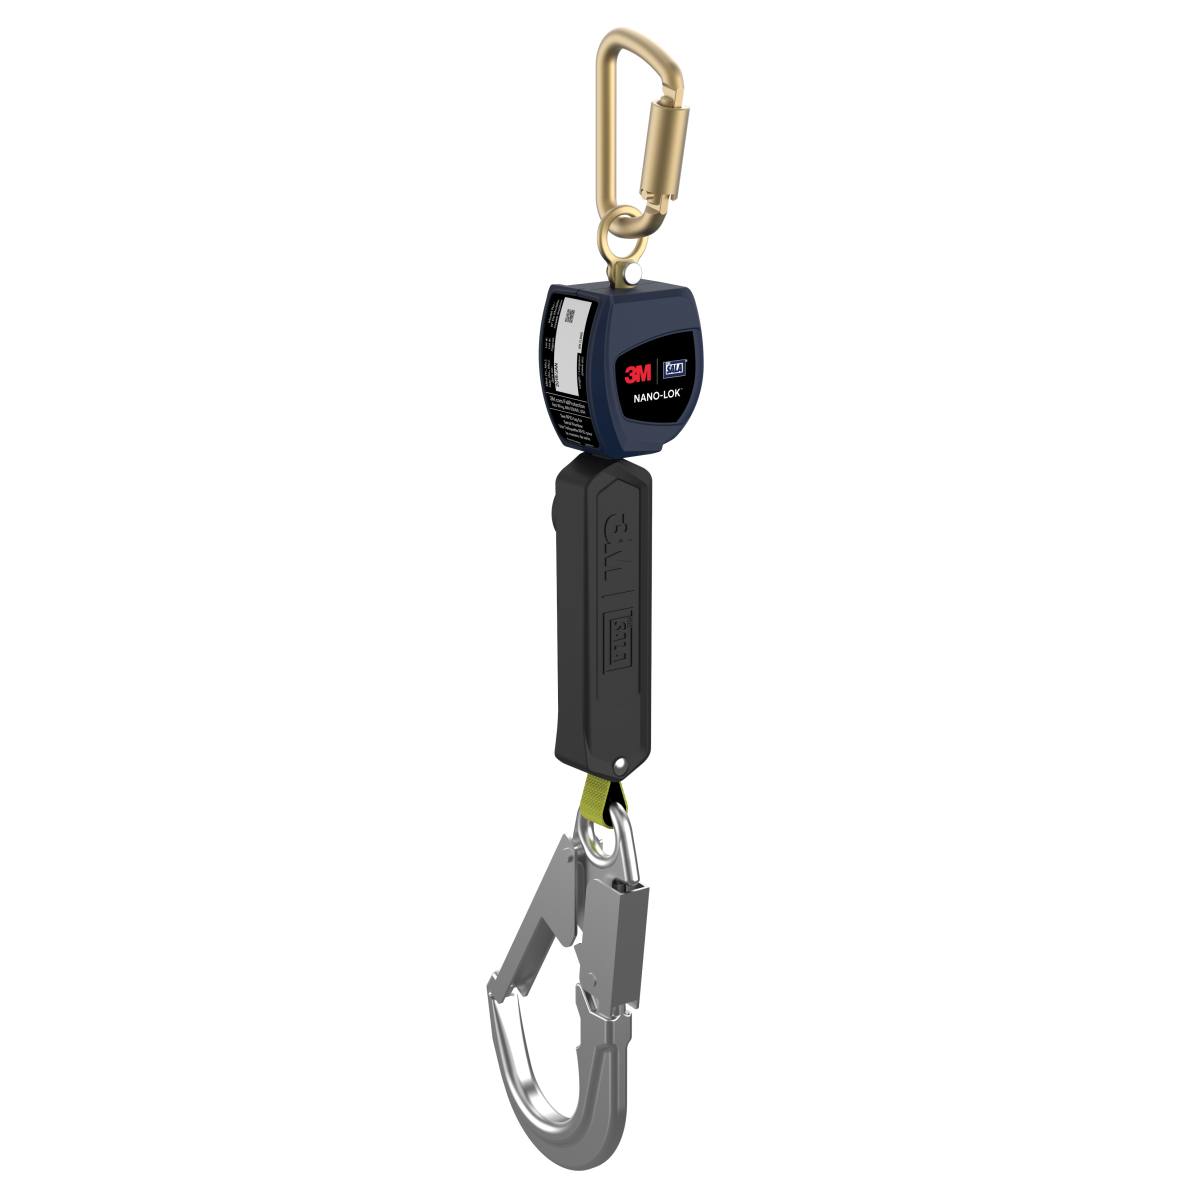 3M DBI-SALA Nano-Lok retractable type fall arrester, length: 2 m, plastic housing, steel Tri-Lock carabiner on housing opening width 19 mm, aluminum scaffold hook on webbing opening width 57 mm, 3M Connected Safety-ready RFID tag for inspection, 2.0 